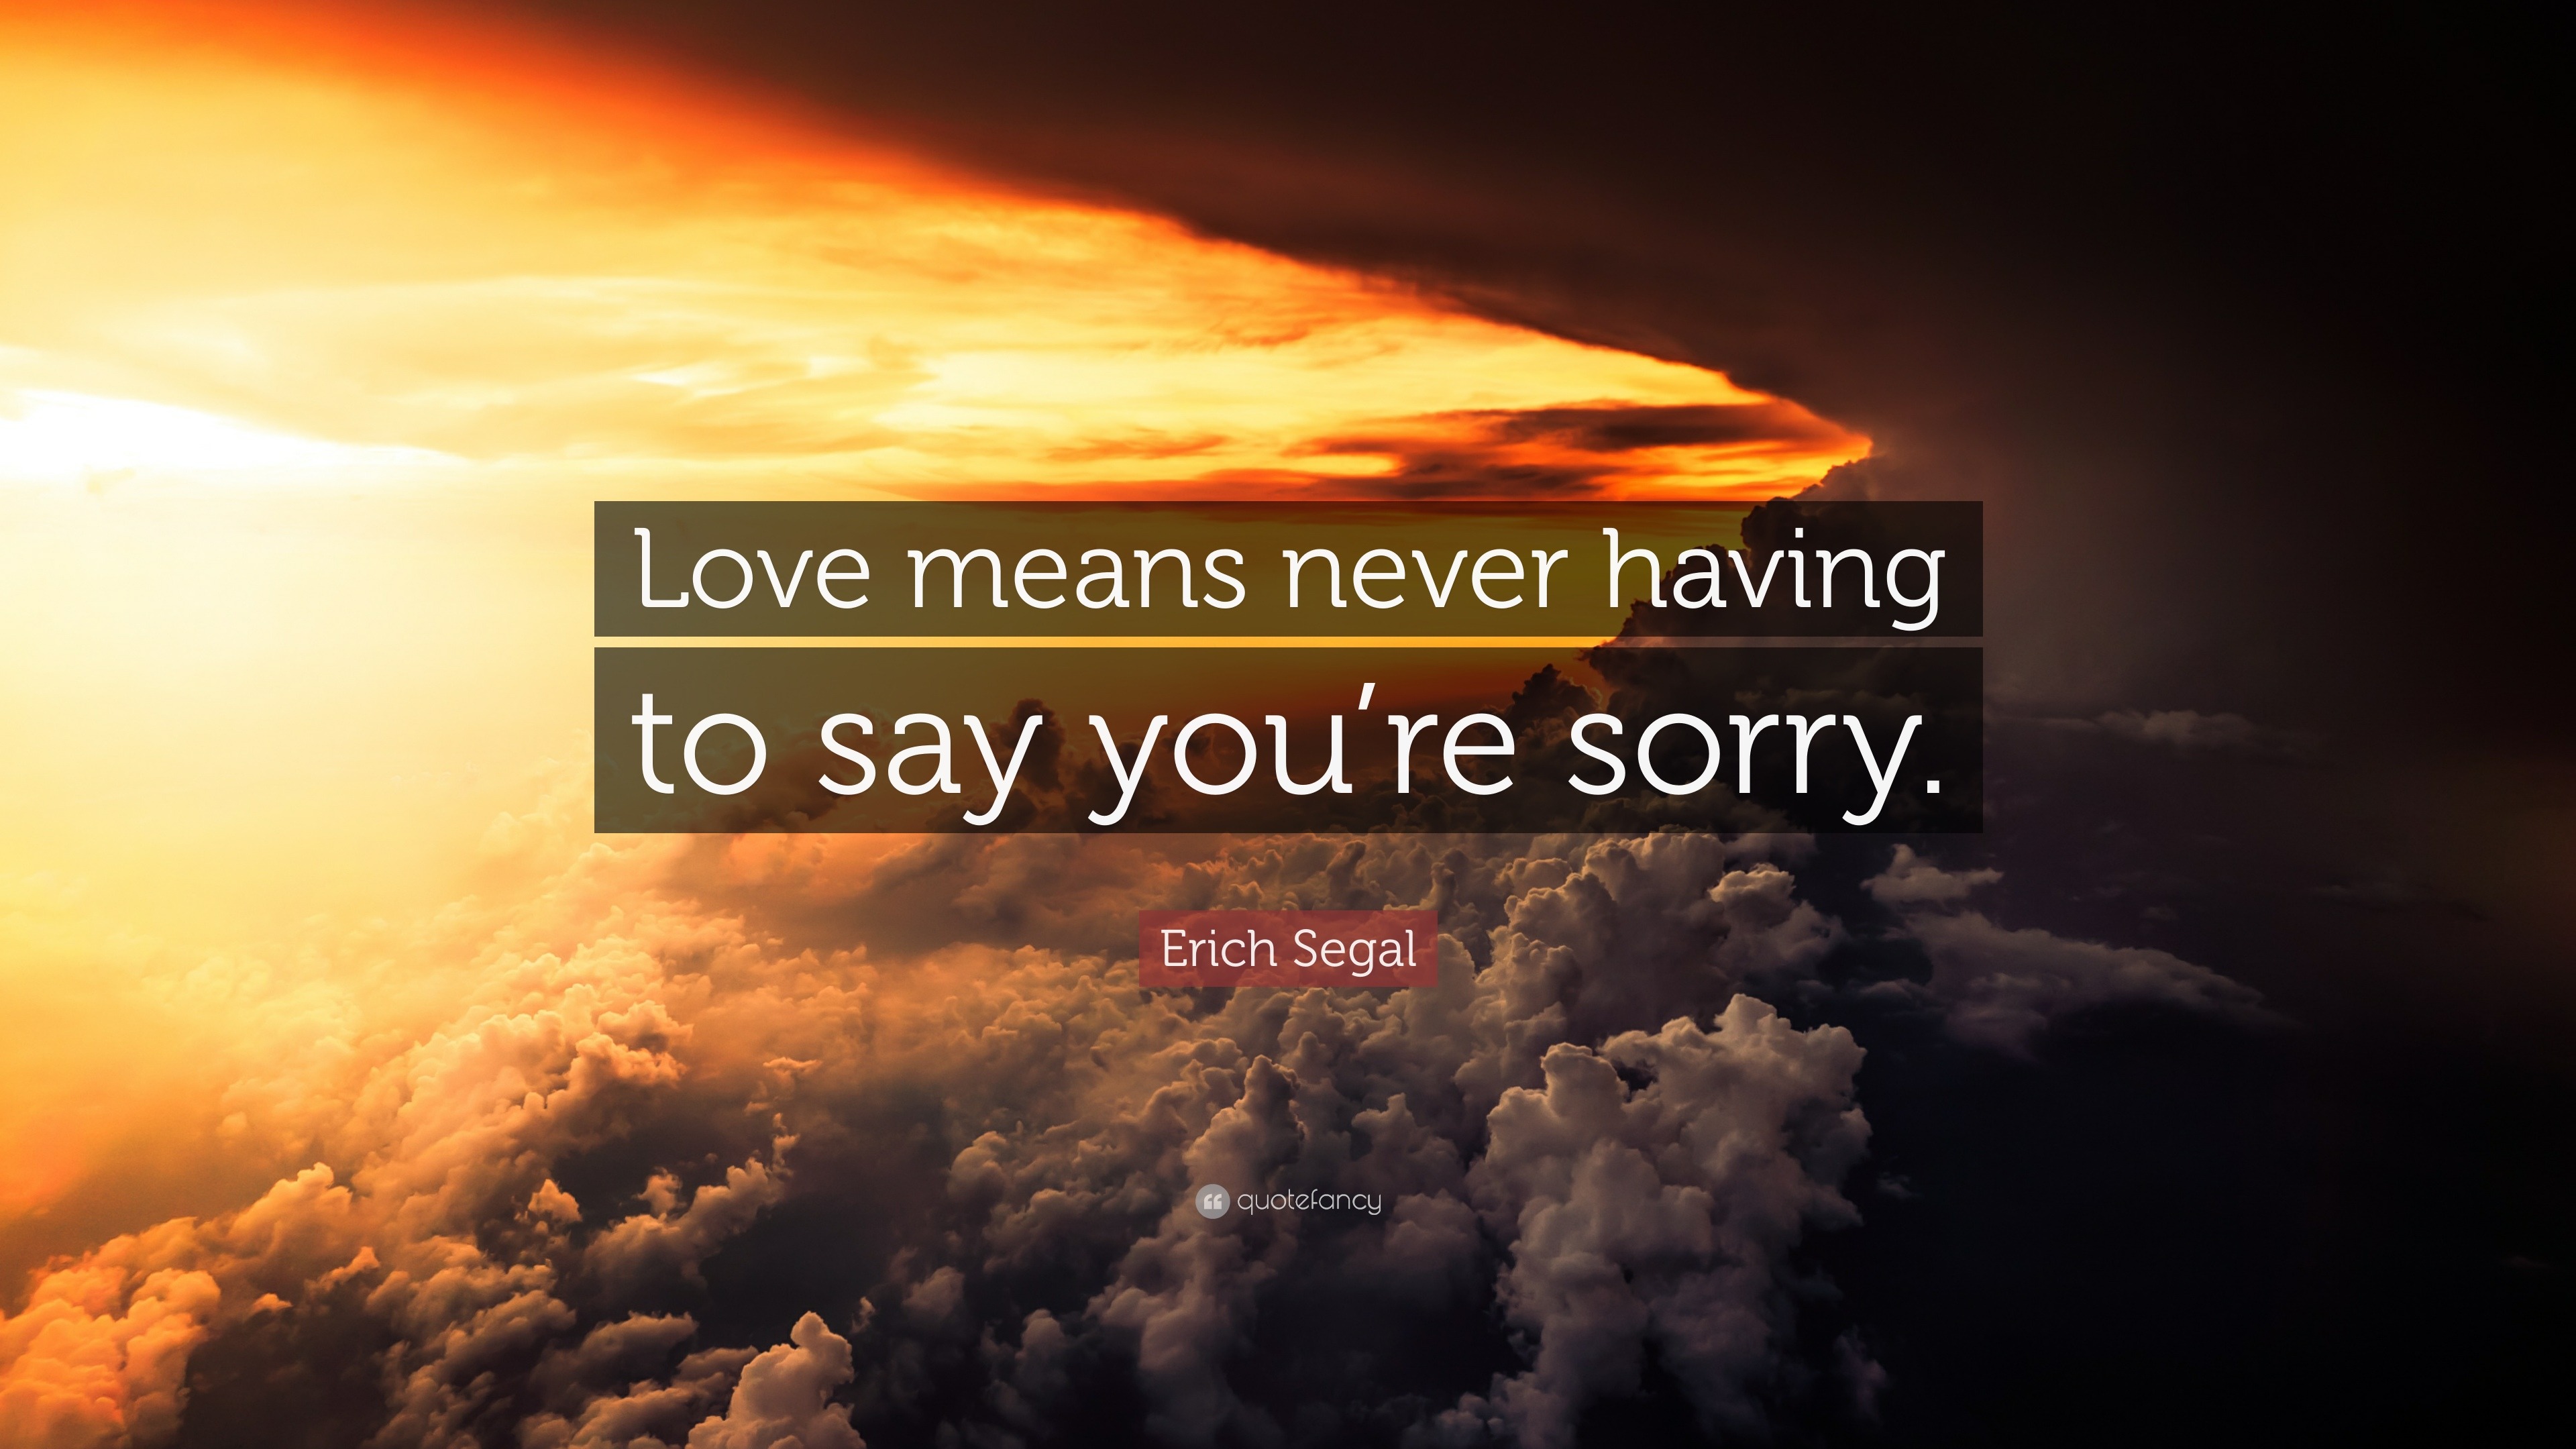 Erich Segal Quote “Love means never having to say you re sorry